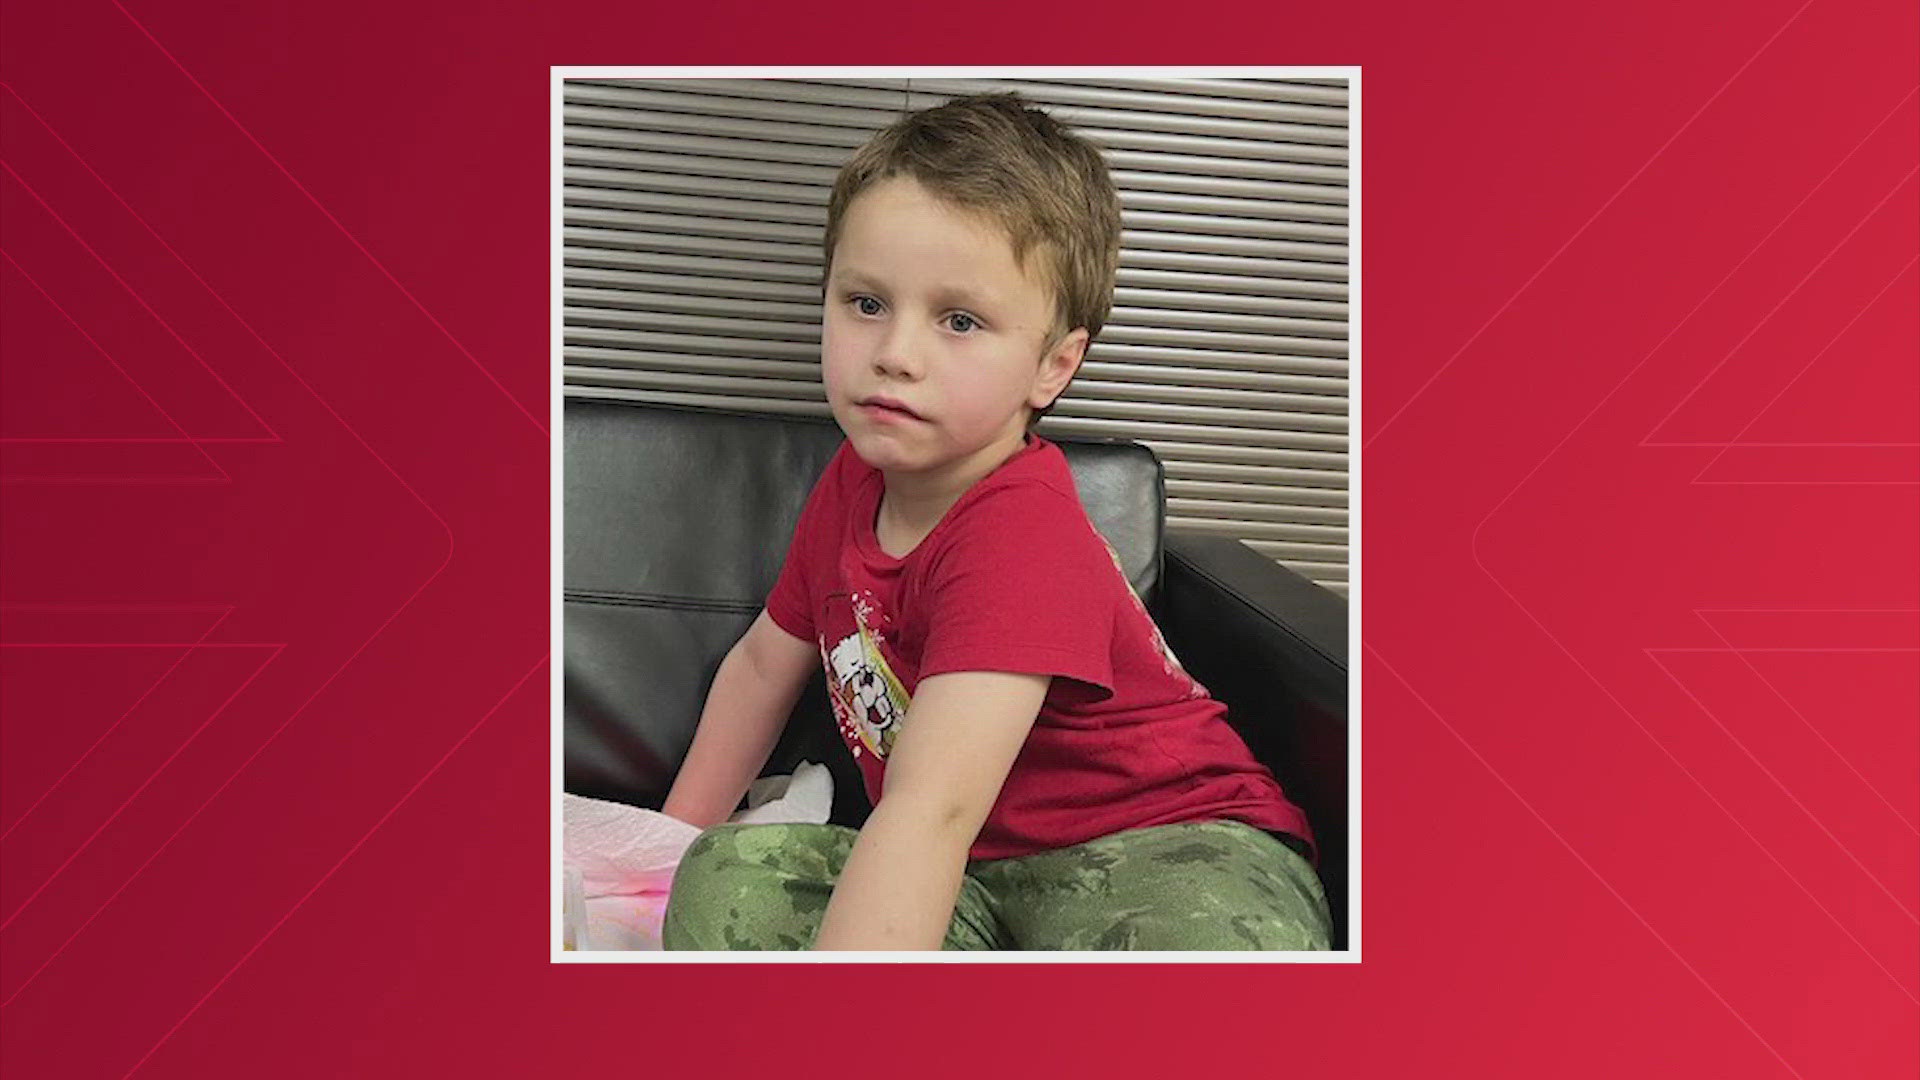 Deputies with the Montgomery County Sheriff’s Office are looking for the parents of a 3-year-old boy found alone in Spring.